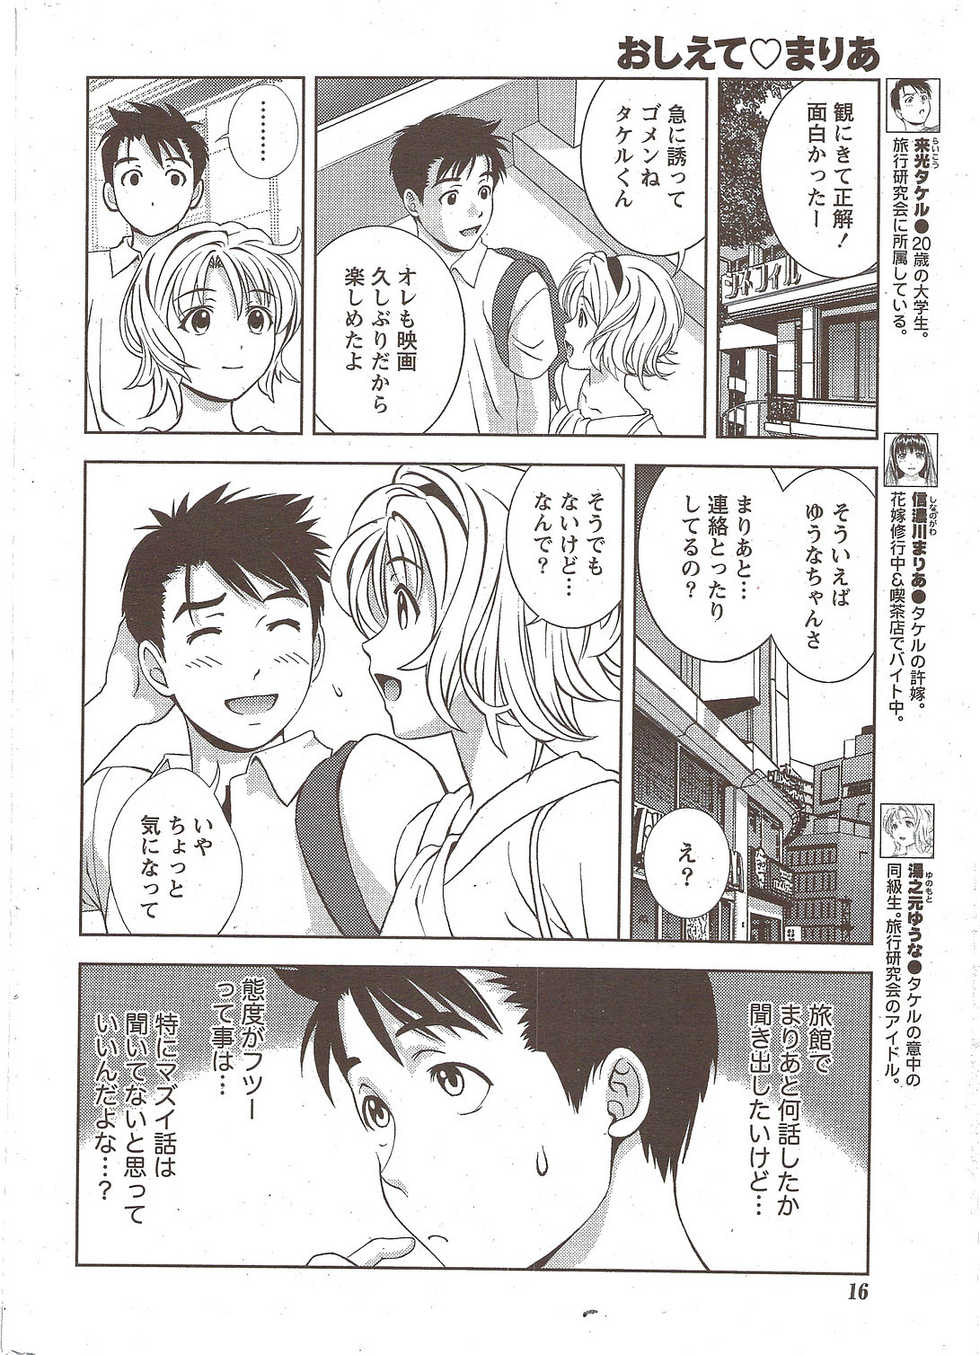 Monthly Vitaman 2010-01 - Page 16